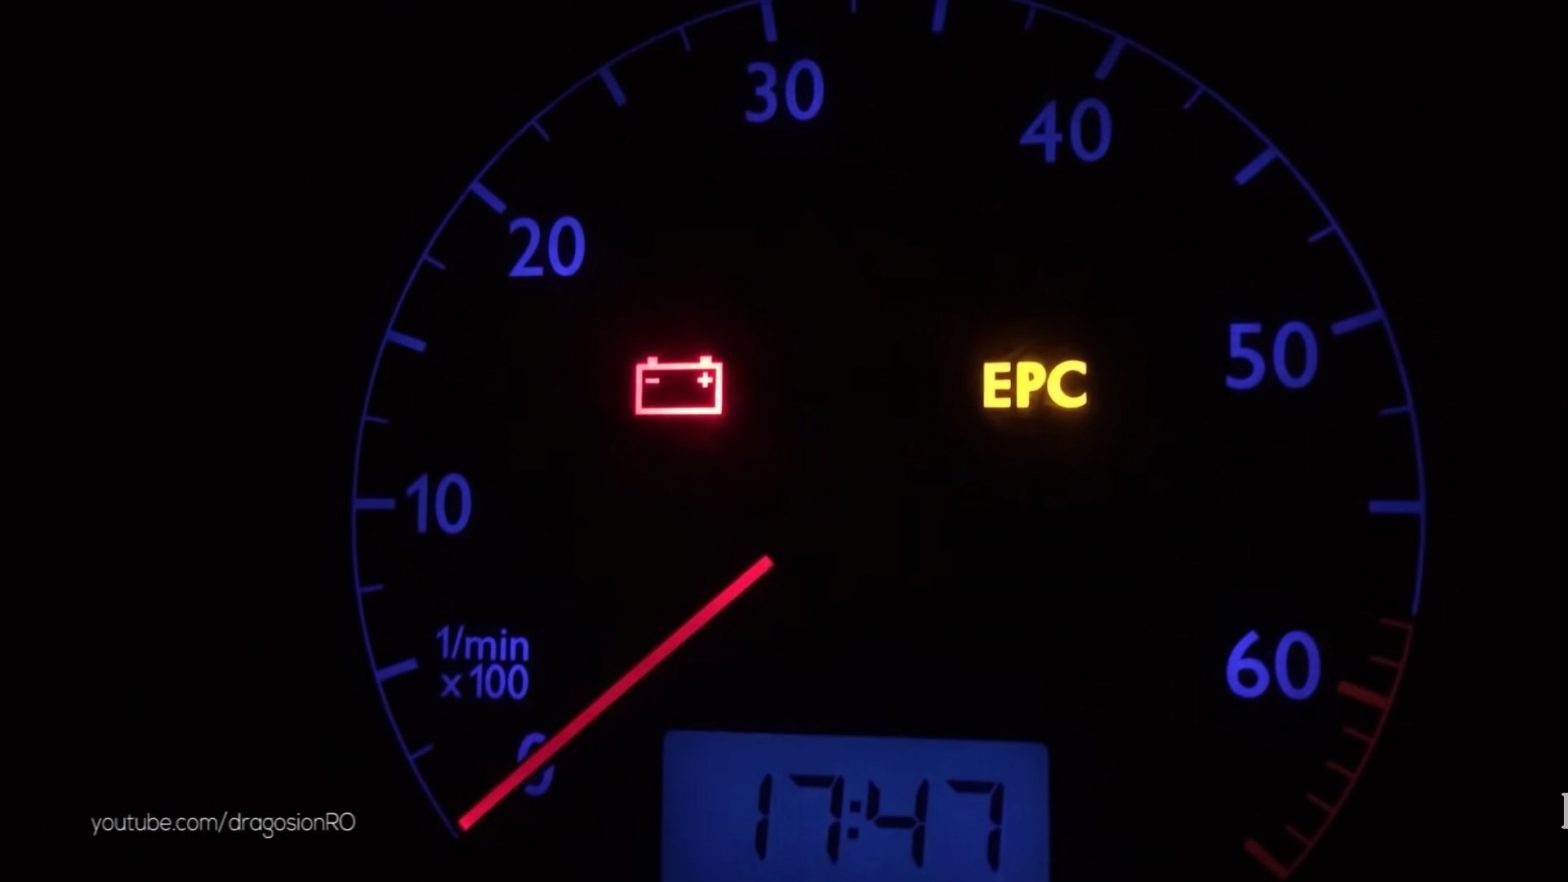 How to fix EPC Light on VW Car